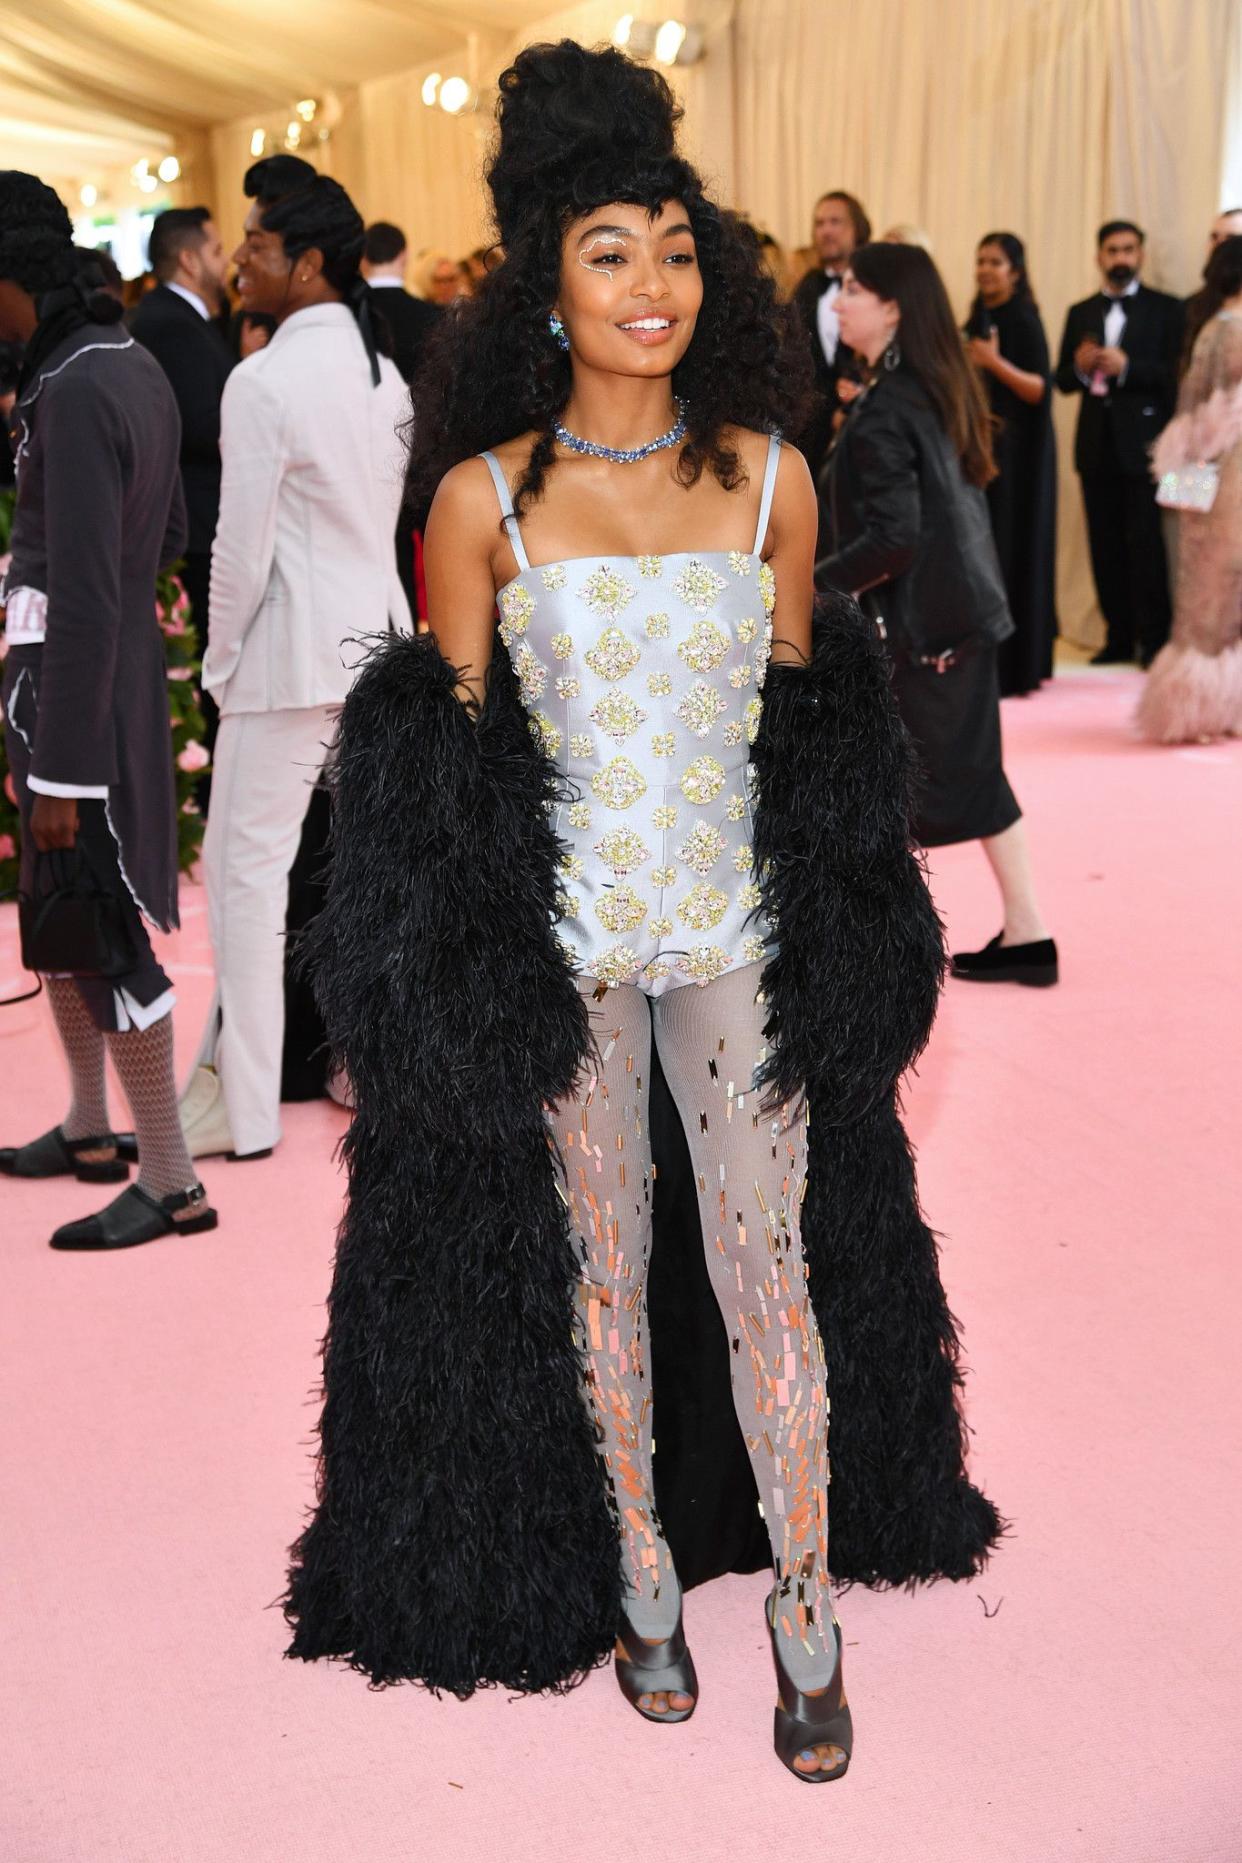 Yara Shahidi attends The 2019 Met Gala Celebrating Camp: Notes on Fashion at Metropolitan Museum of Art on May 06, 2019 in New York City.